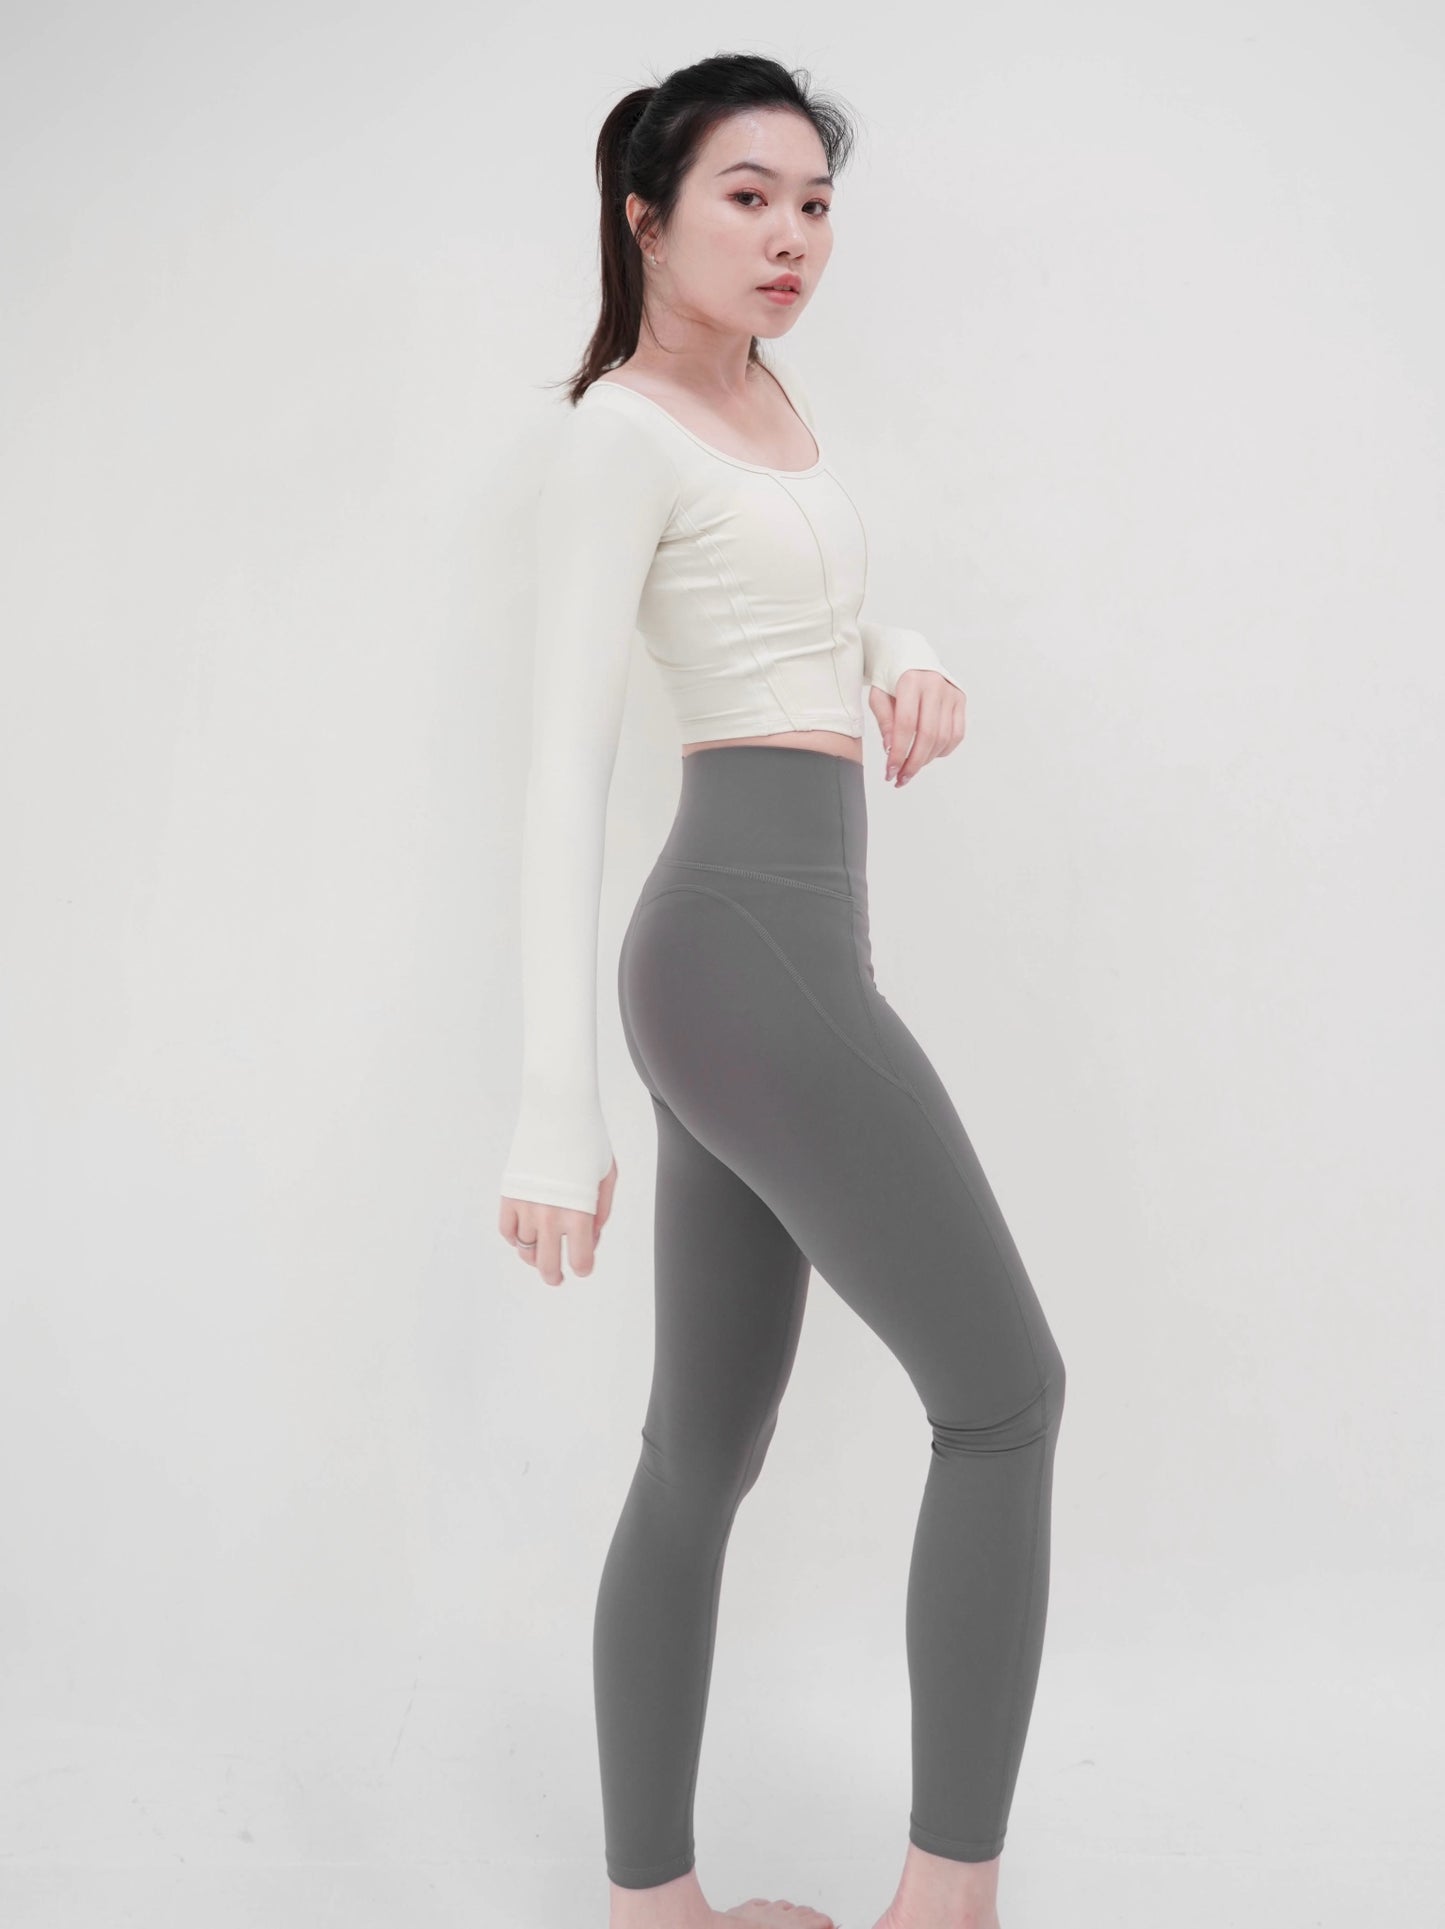 Pre-order/Recommendation for heavy training-Shaping quick-drying 9-minute leggings